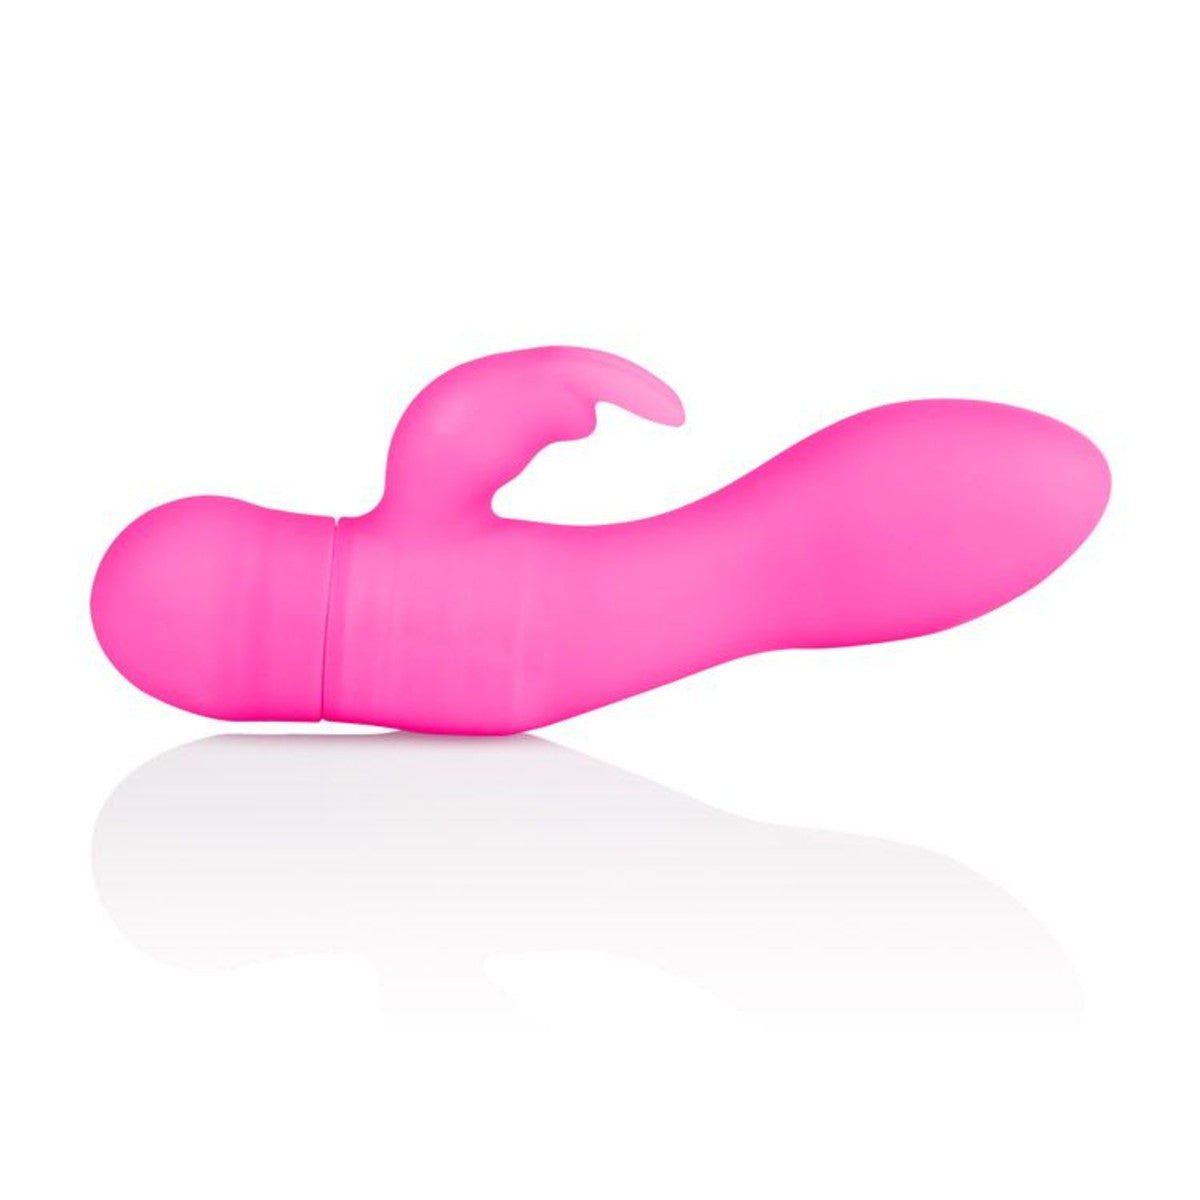 Silicone Jack Rabbit One Touch  - Club X